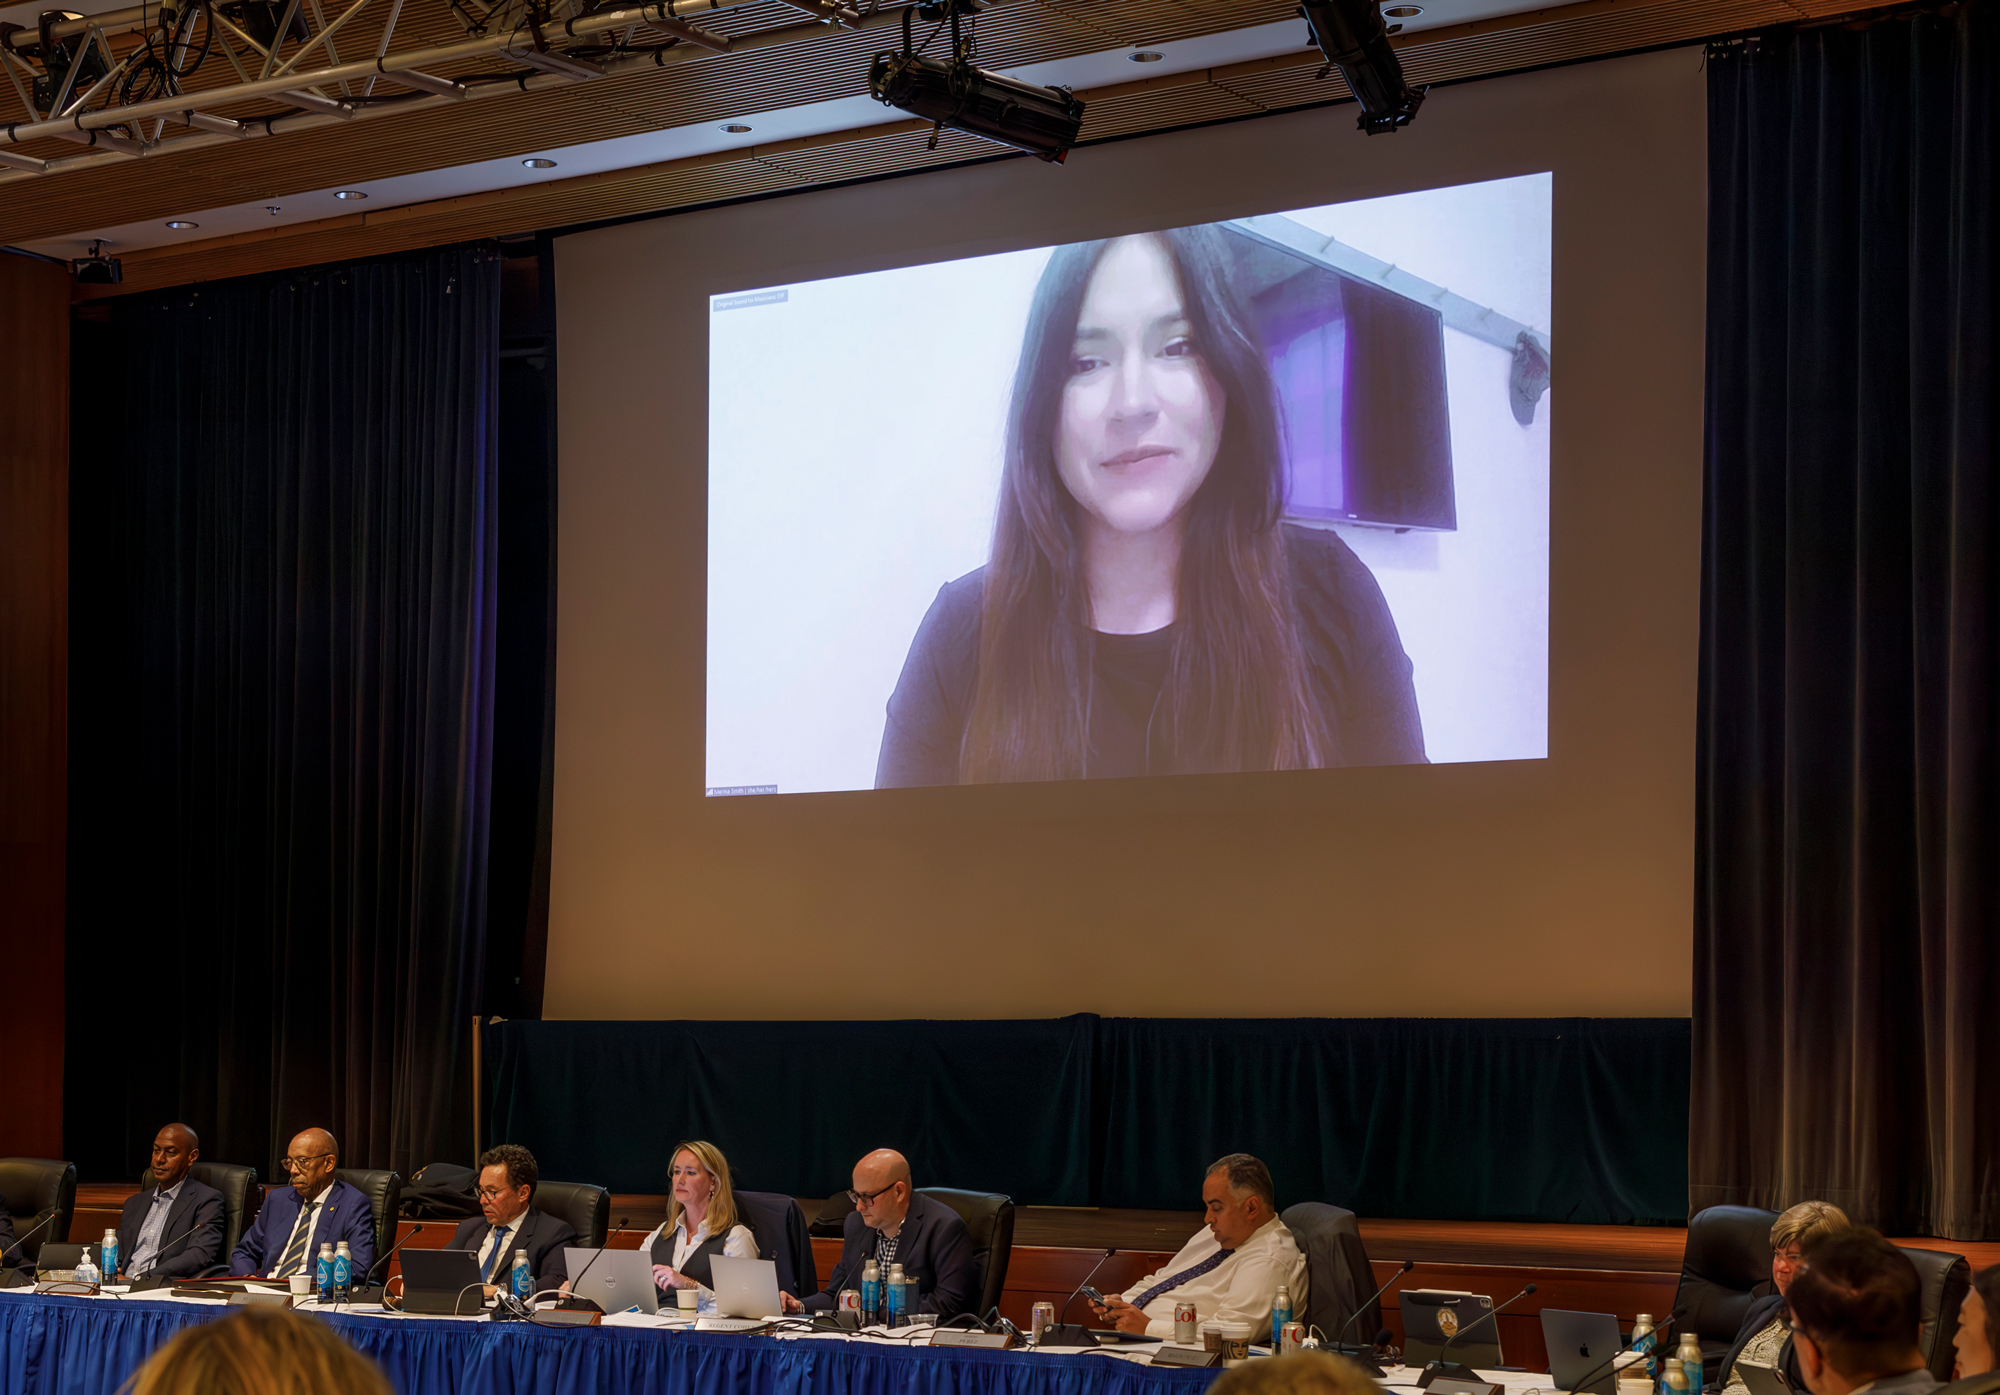 A young woman with dark long hair, Merina Smith, delivers remarks to the Regents from a projector screen via Zoom